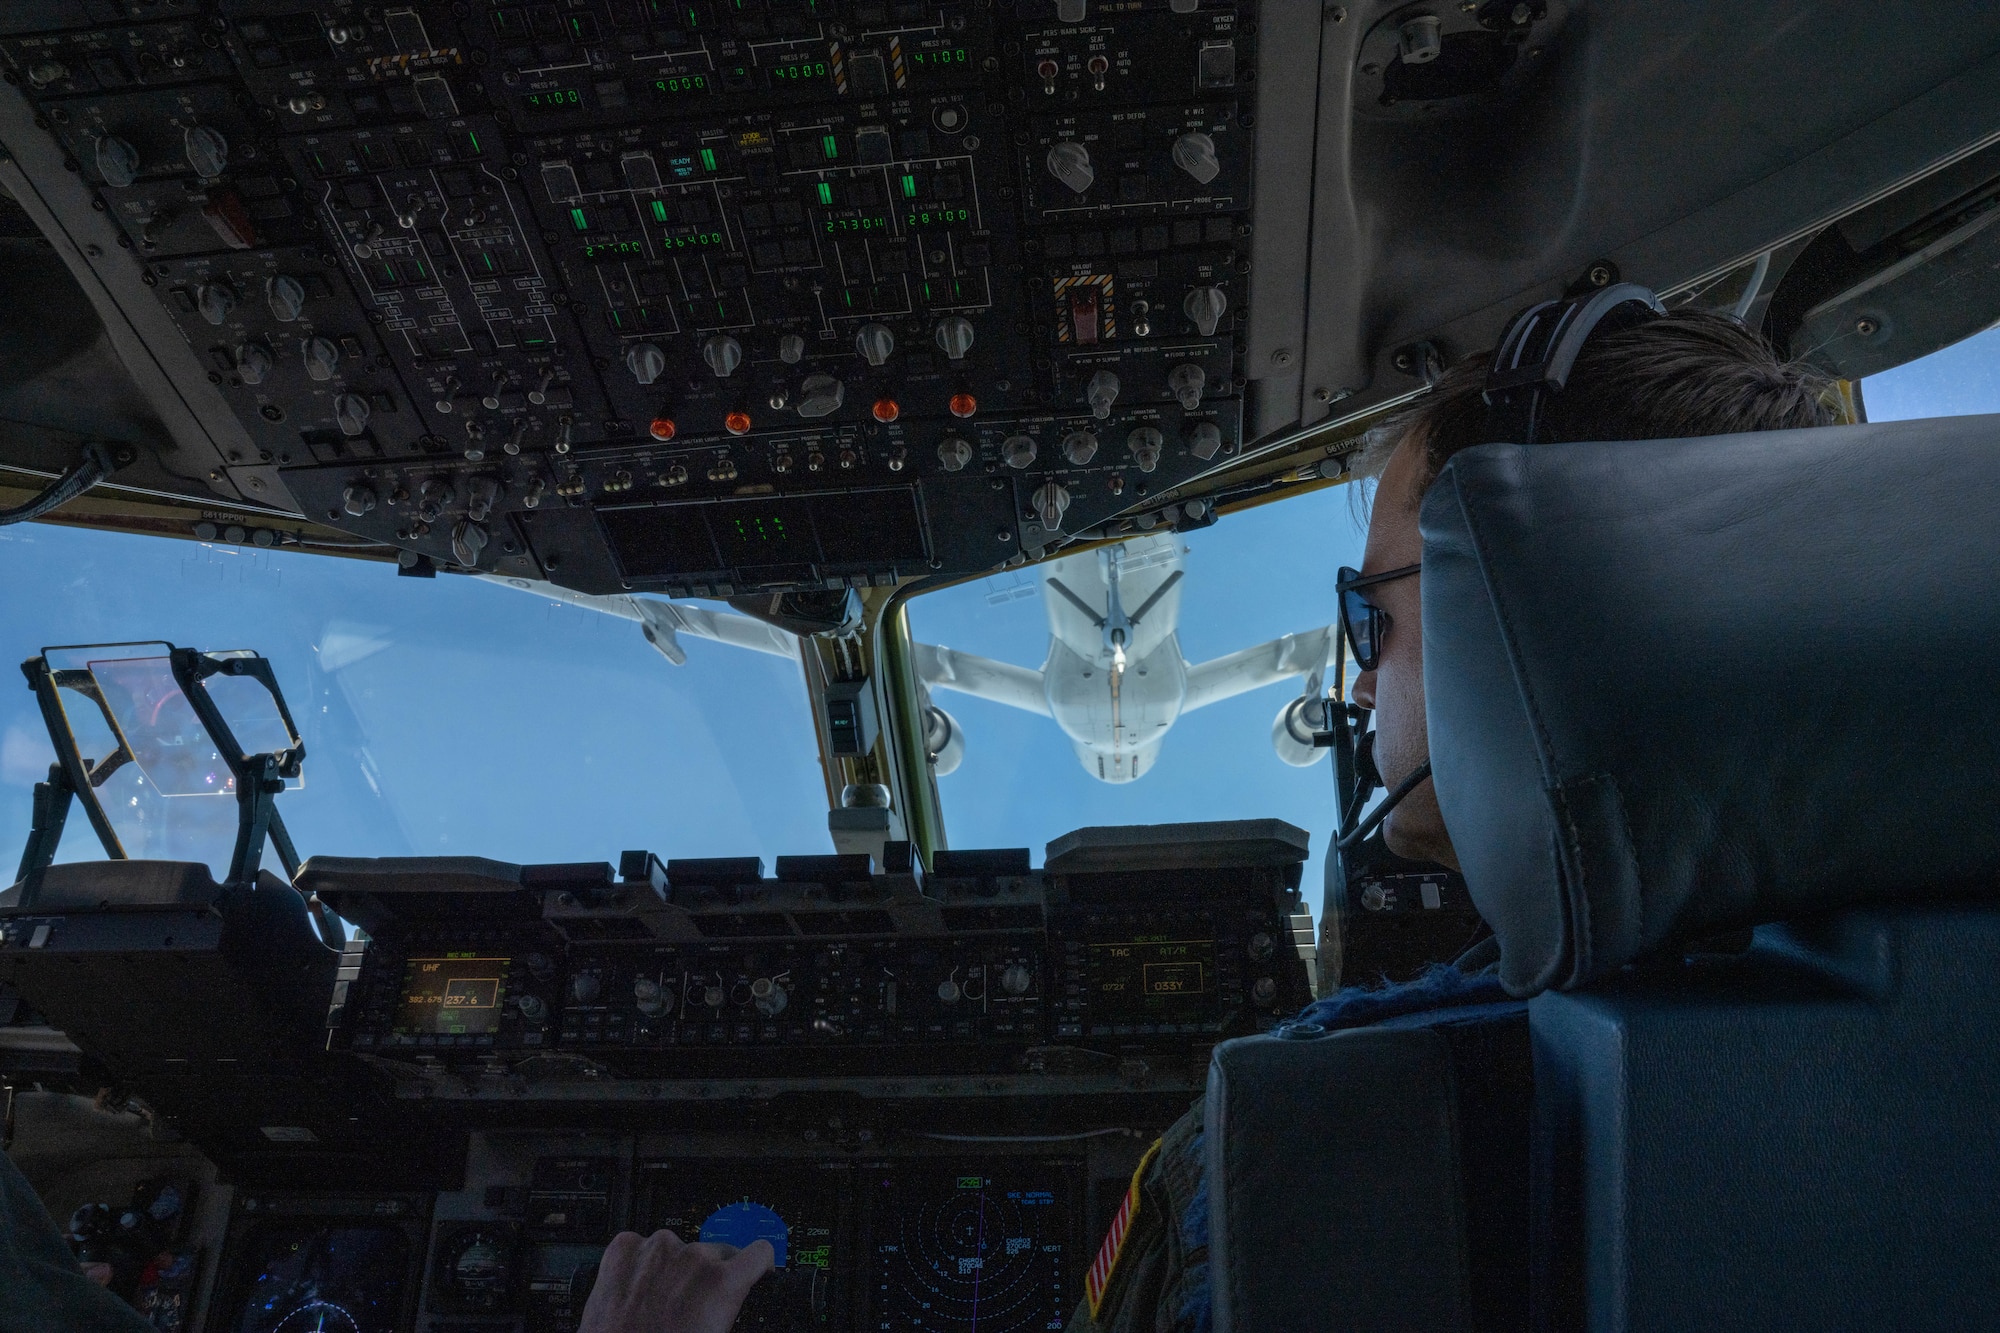 U.S. Air Force Maj. James Simons, 535th Airlift Squadron pilot, prepares to receive fuel from a Royal Australian Air Force KC-30A Multi-Role Tanker Transport (MRTT) in the skies over Australia during a training flight for Global Dexterity 23-2, Nov. 28, 2023. This exercise is designed so that the U.S. Air Force and the Royal Australian Air Force can develop bilateral tactical airlift capabilities and learn from each other to strengthen partnerships in the Indo-Pacific Region.(U.S. Air Force photo by Senior Airman Makensie Cooper)